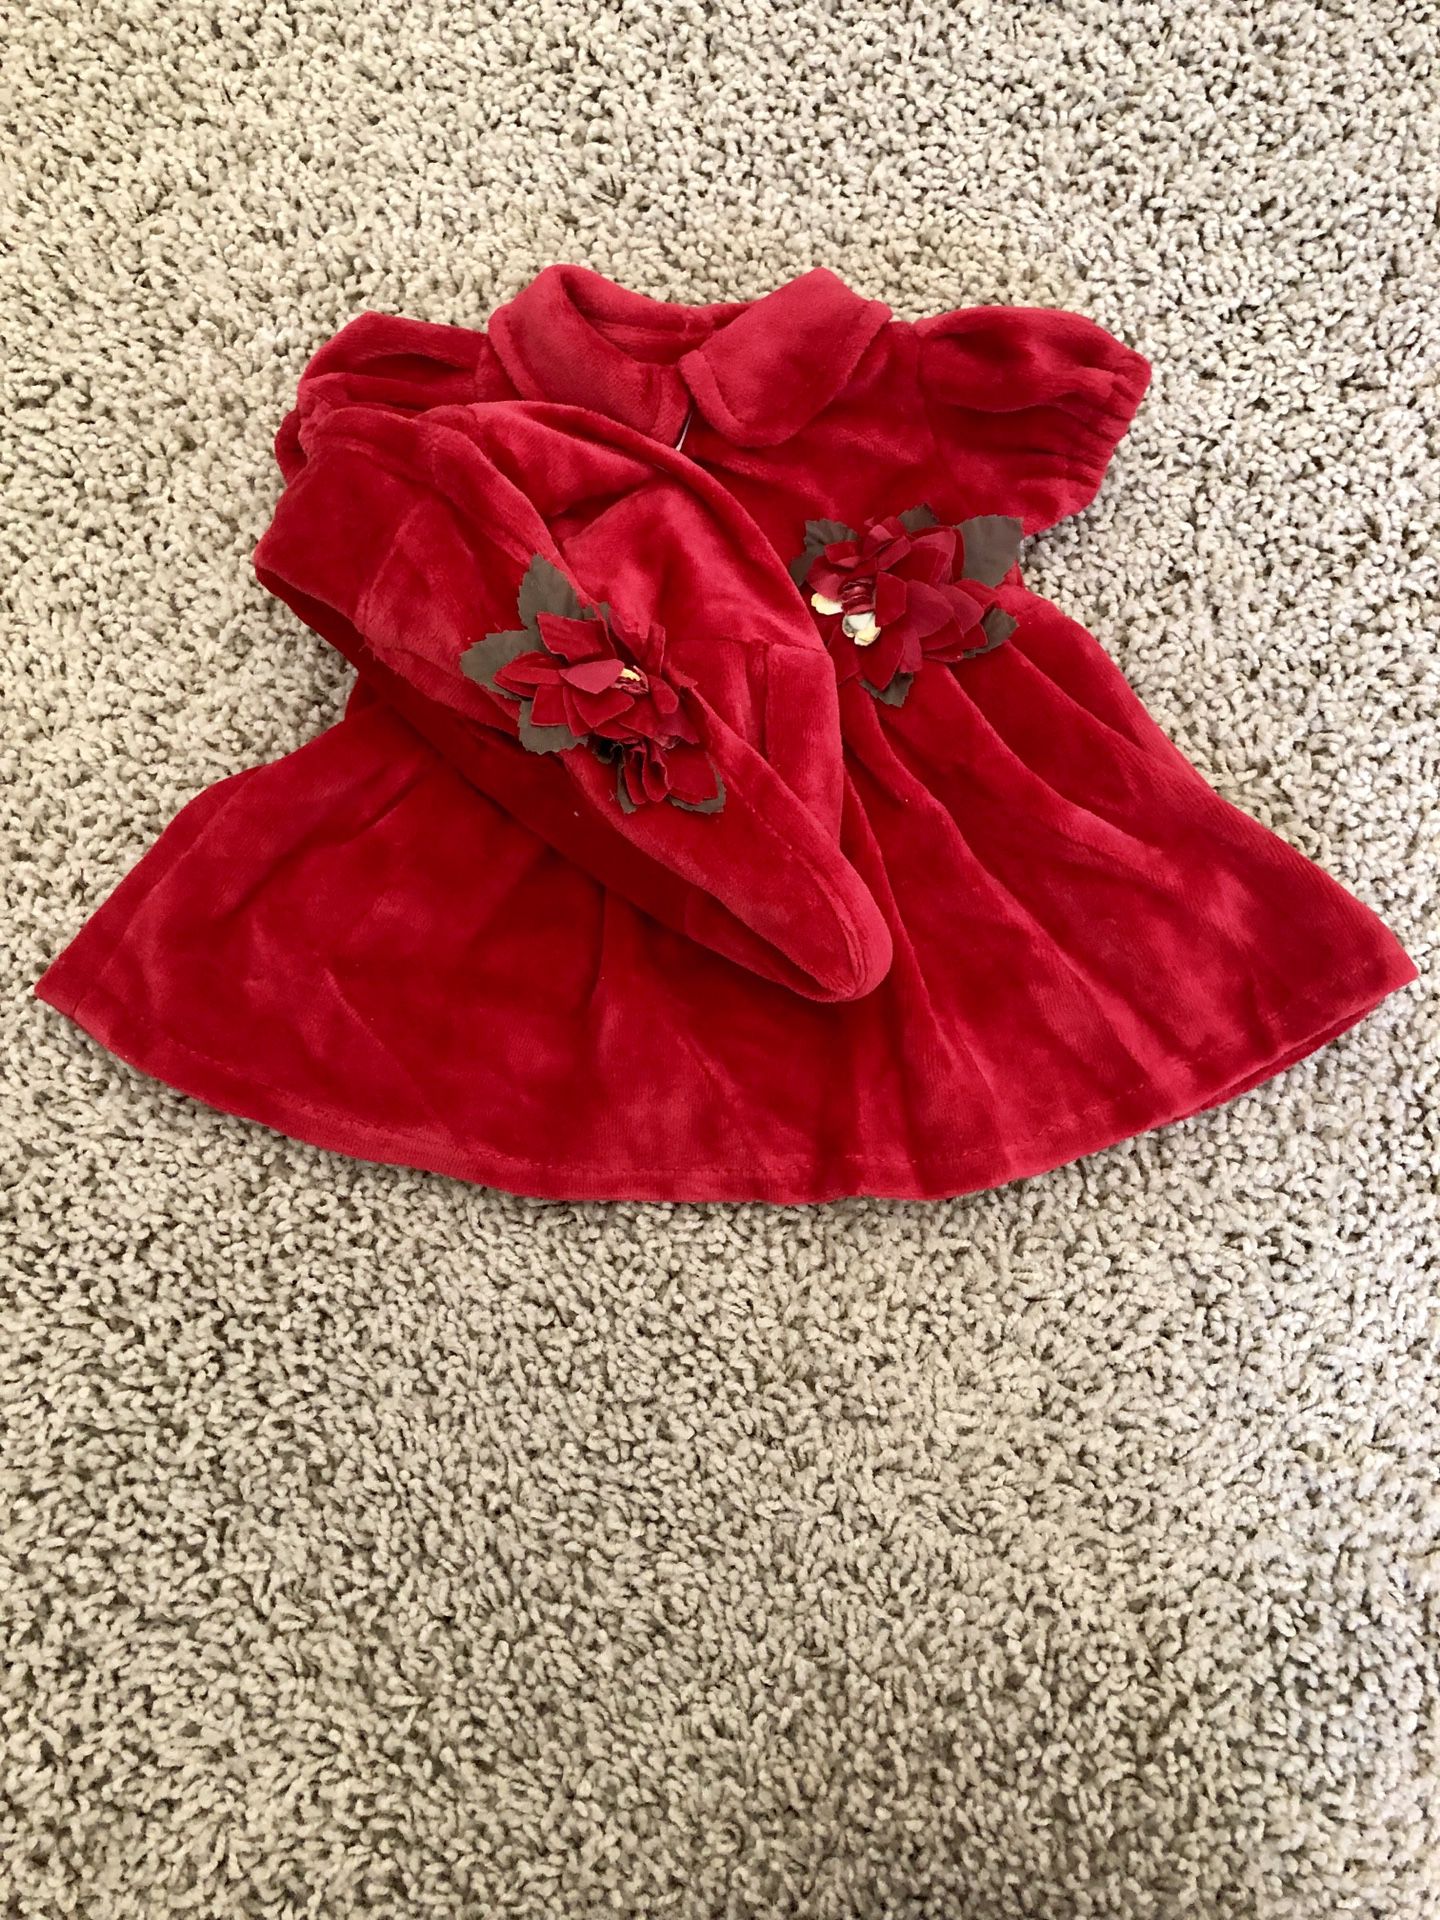 COLLECTIBLE VELOUR TOY GOWN